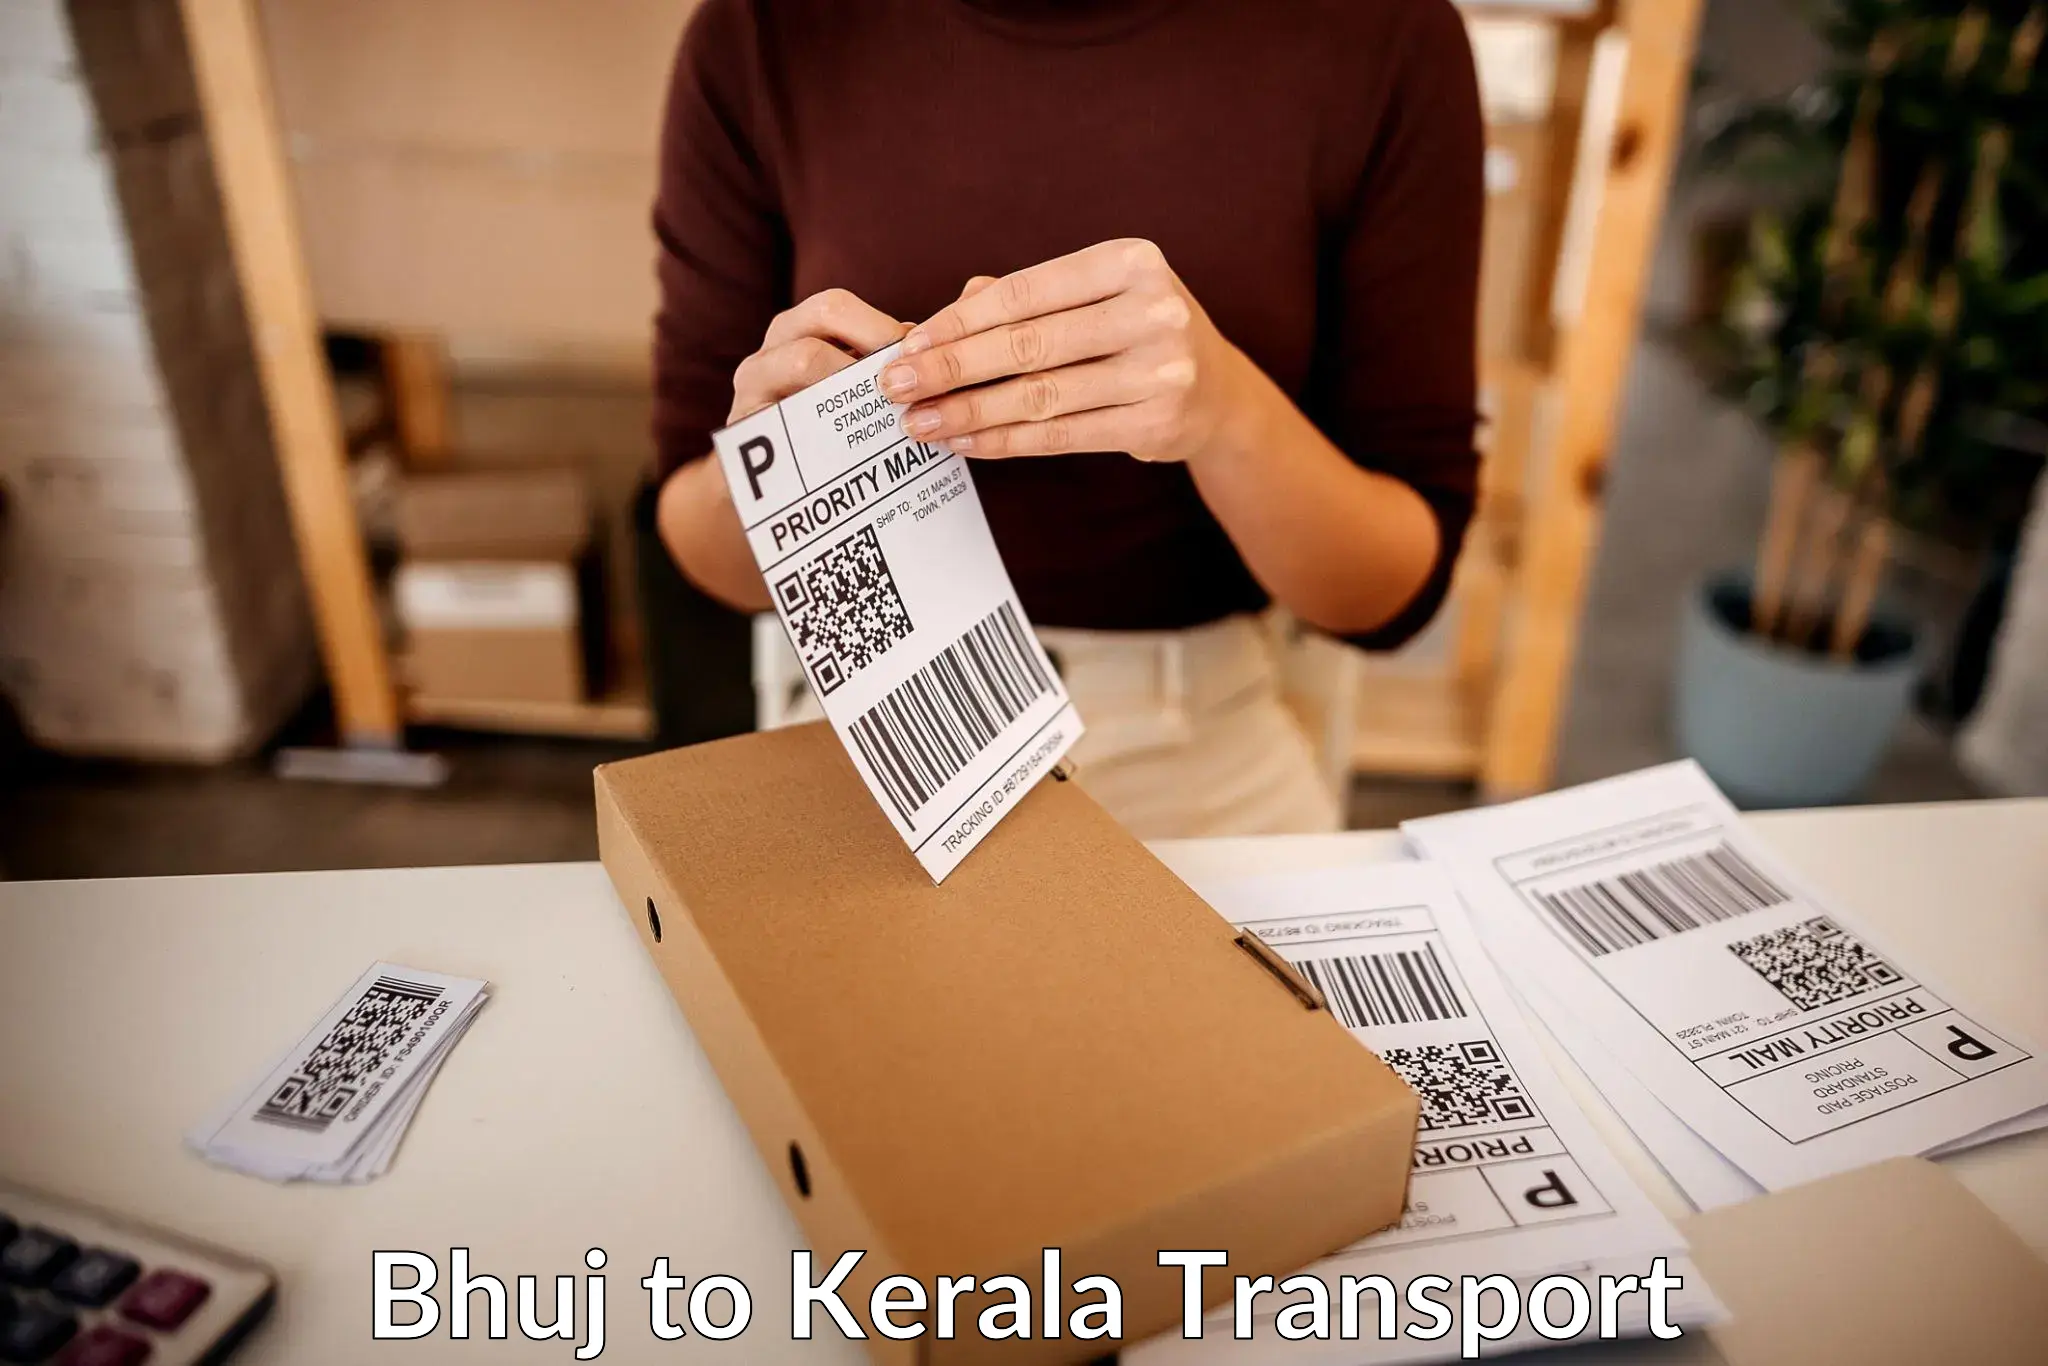 Nationwide transport services Bhuj to Kerala